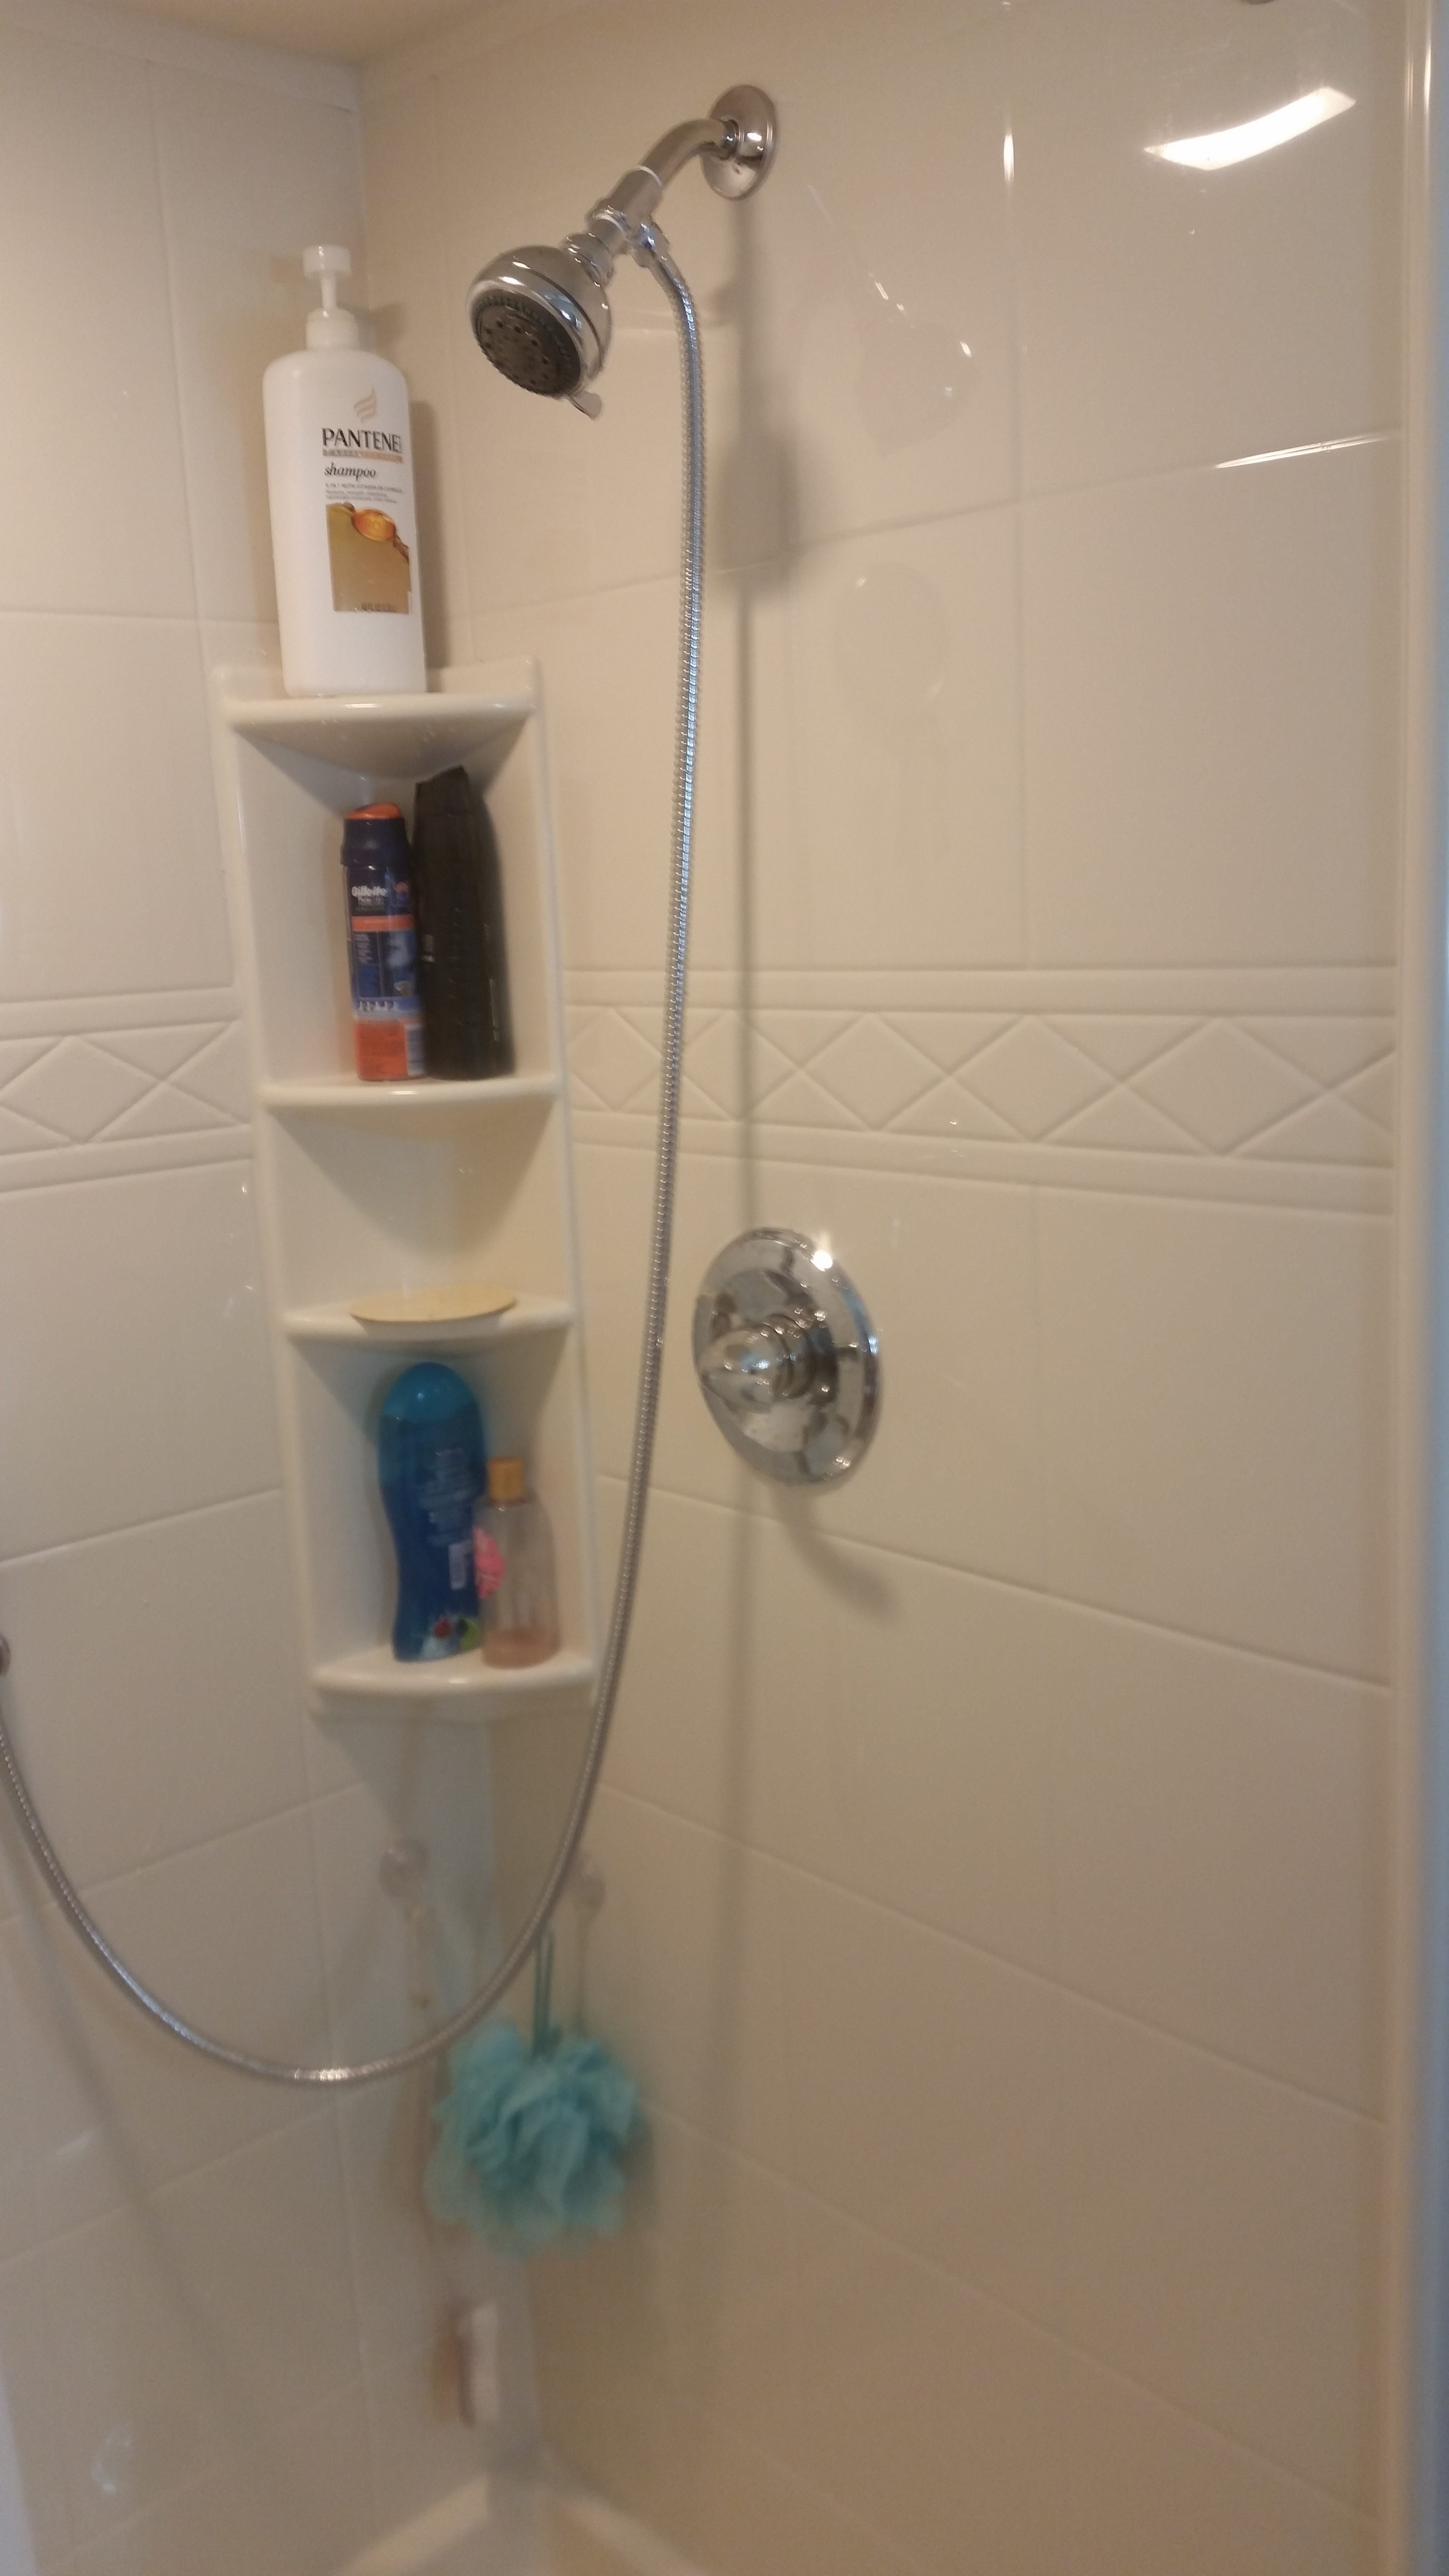 What are some complaints about Bath Fitters?